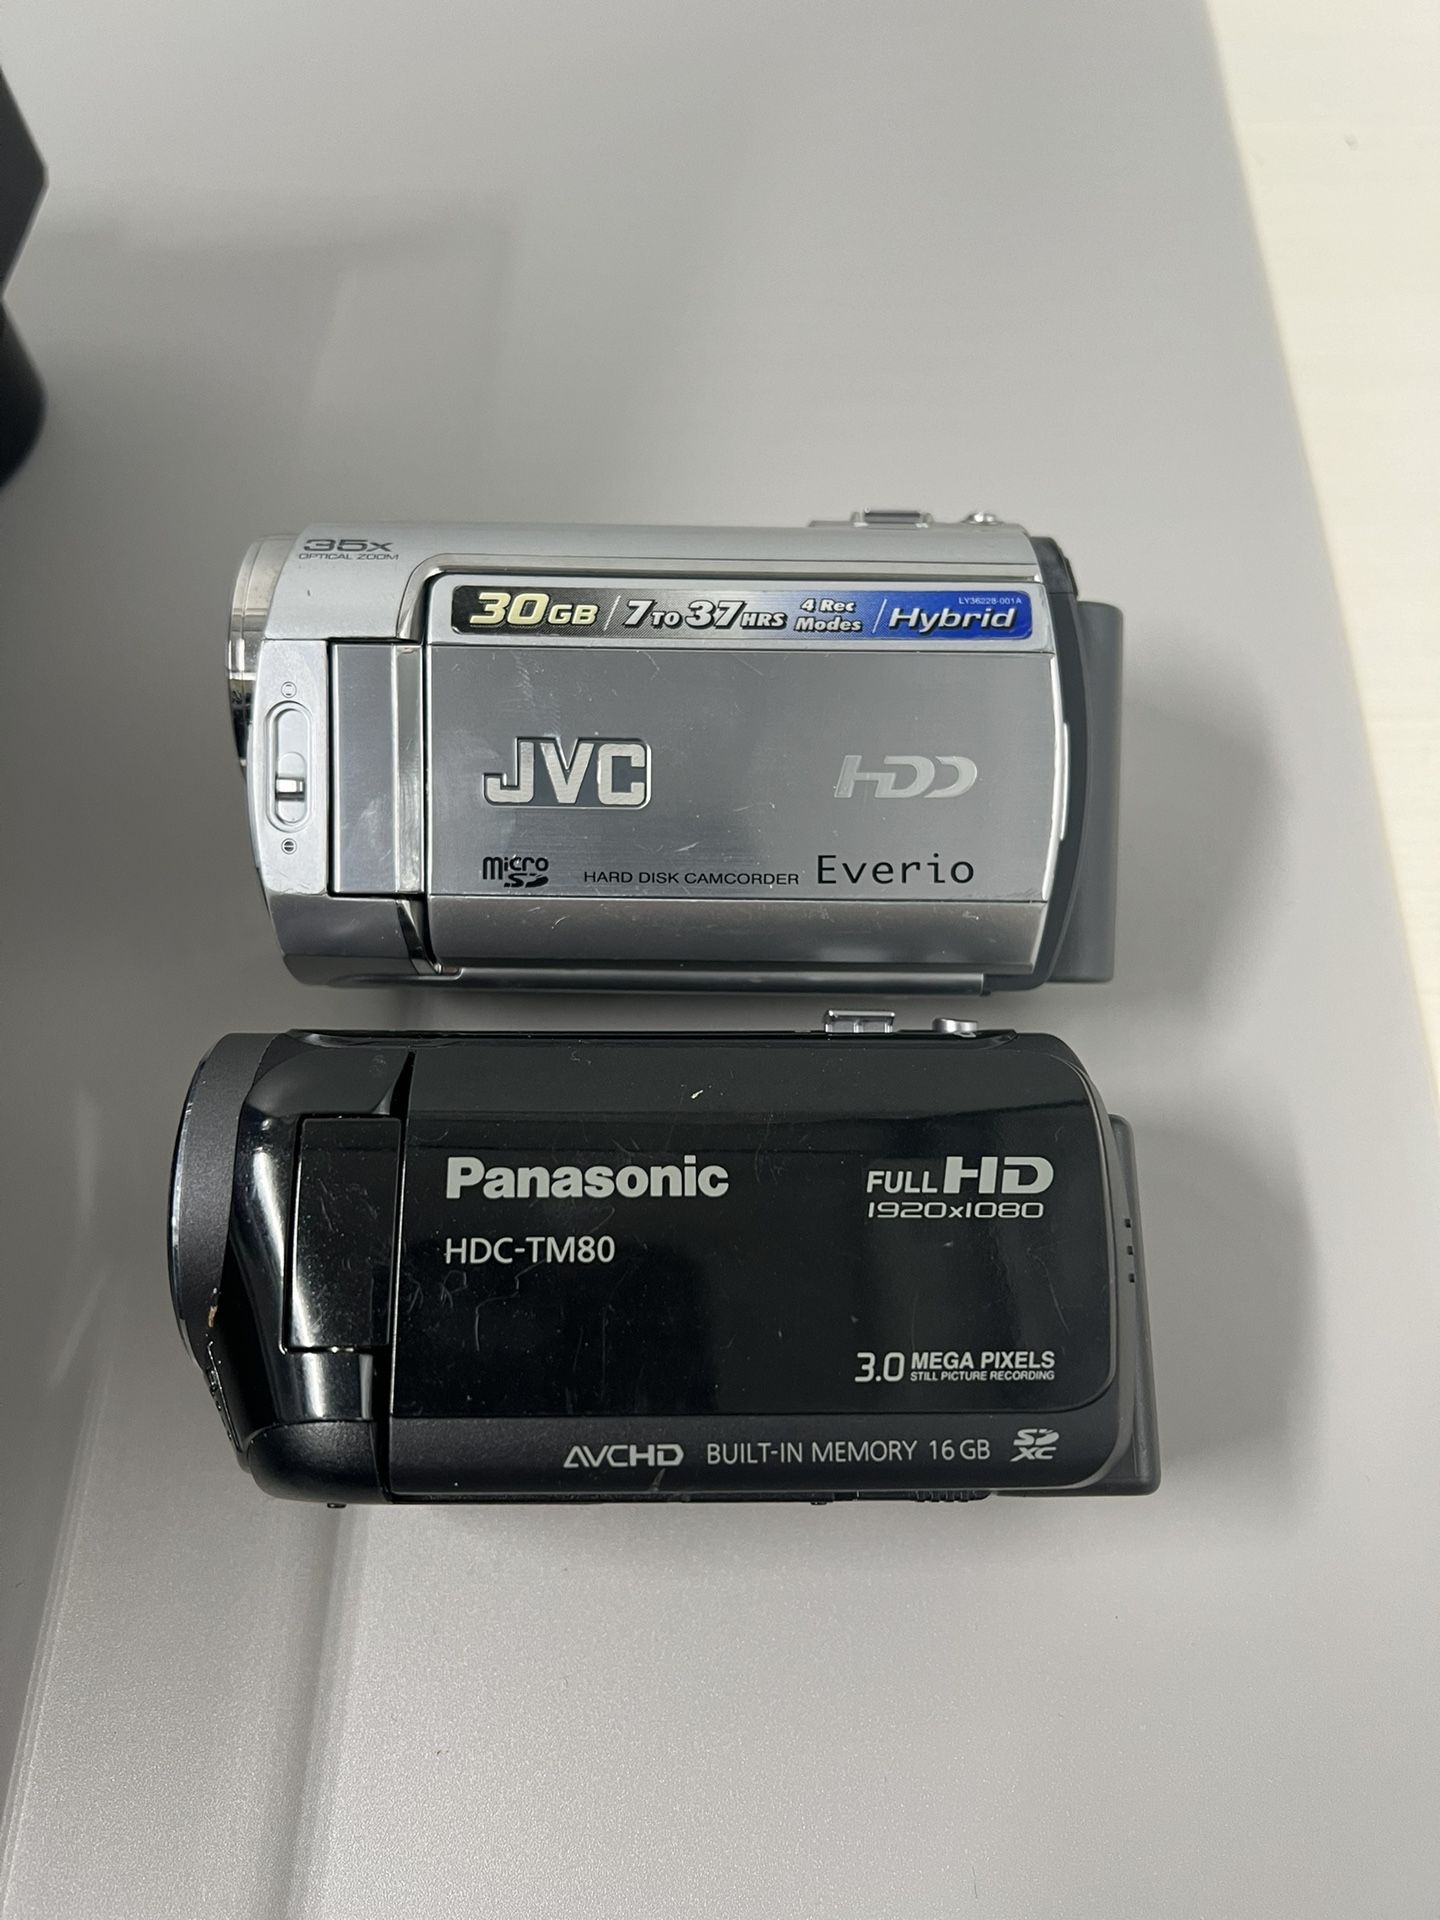 Two Camcorders